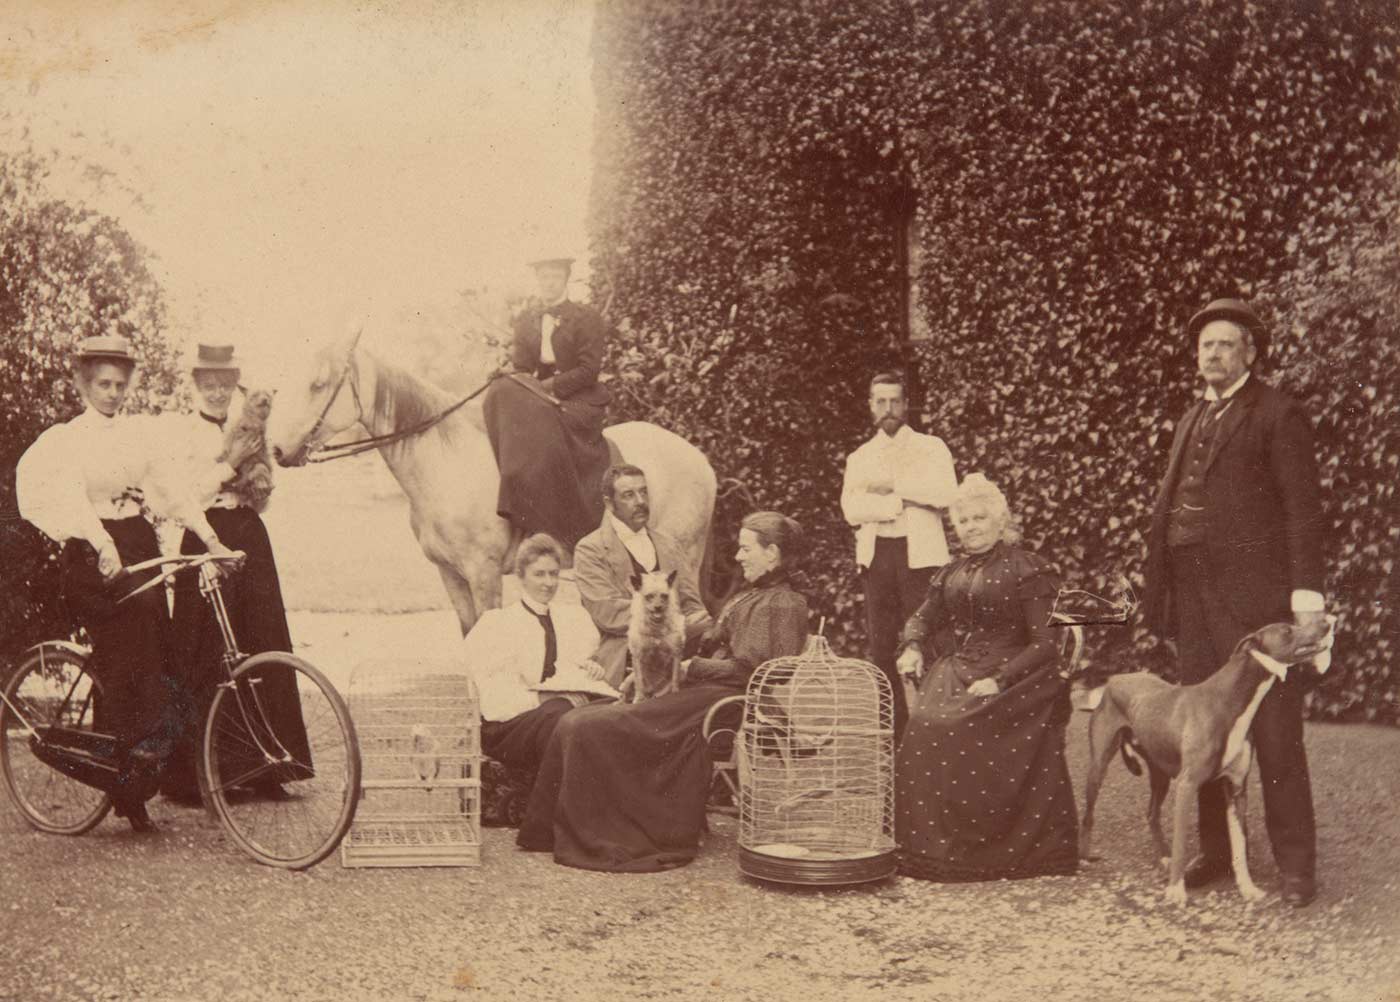 A black and white photograph that depicts Faithfull family group outside the Big House at Springfield. Left to right: Hope Faithfull with bicycle; Clare Faithfull holding a small dog; Lilian Faithfull on her horse; in front of her Ethel Faithfull (nee Joplin); Lucian Faithfull; Florence Faithfull with a dog on her lap; William Hugh Anderson with his arms folded, standing in the background wearing a light coloured jacket; unidentified woman seated; unidentified man standing. There are two cages holding birds in the foreground. - click to view larger image